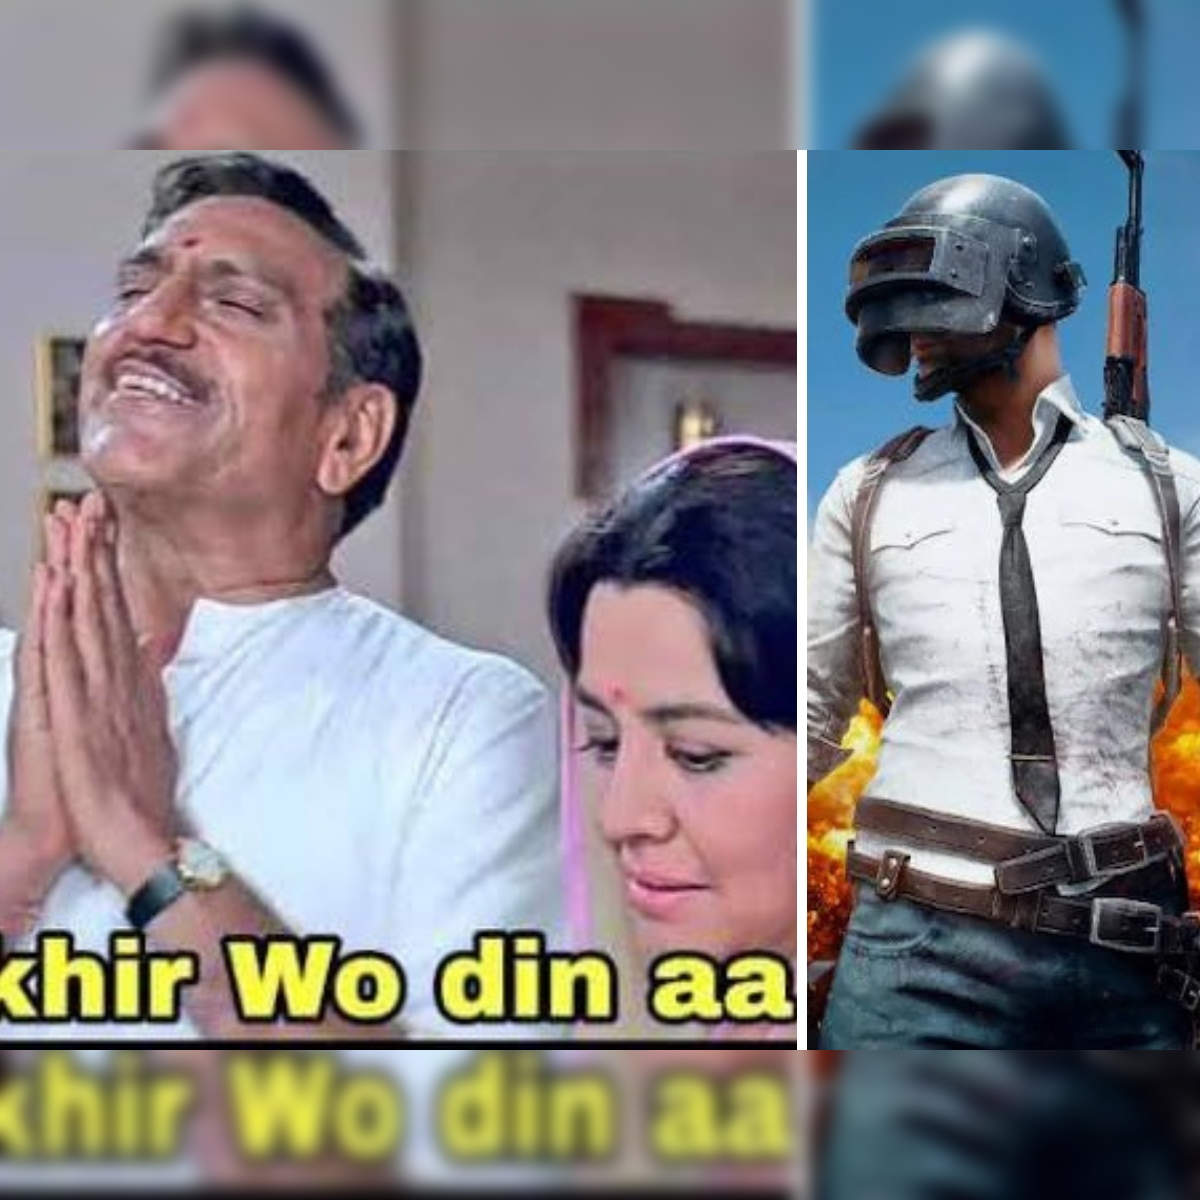 The Indian Meme Game N/A - shop for The Indian Meme Game products